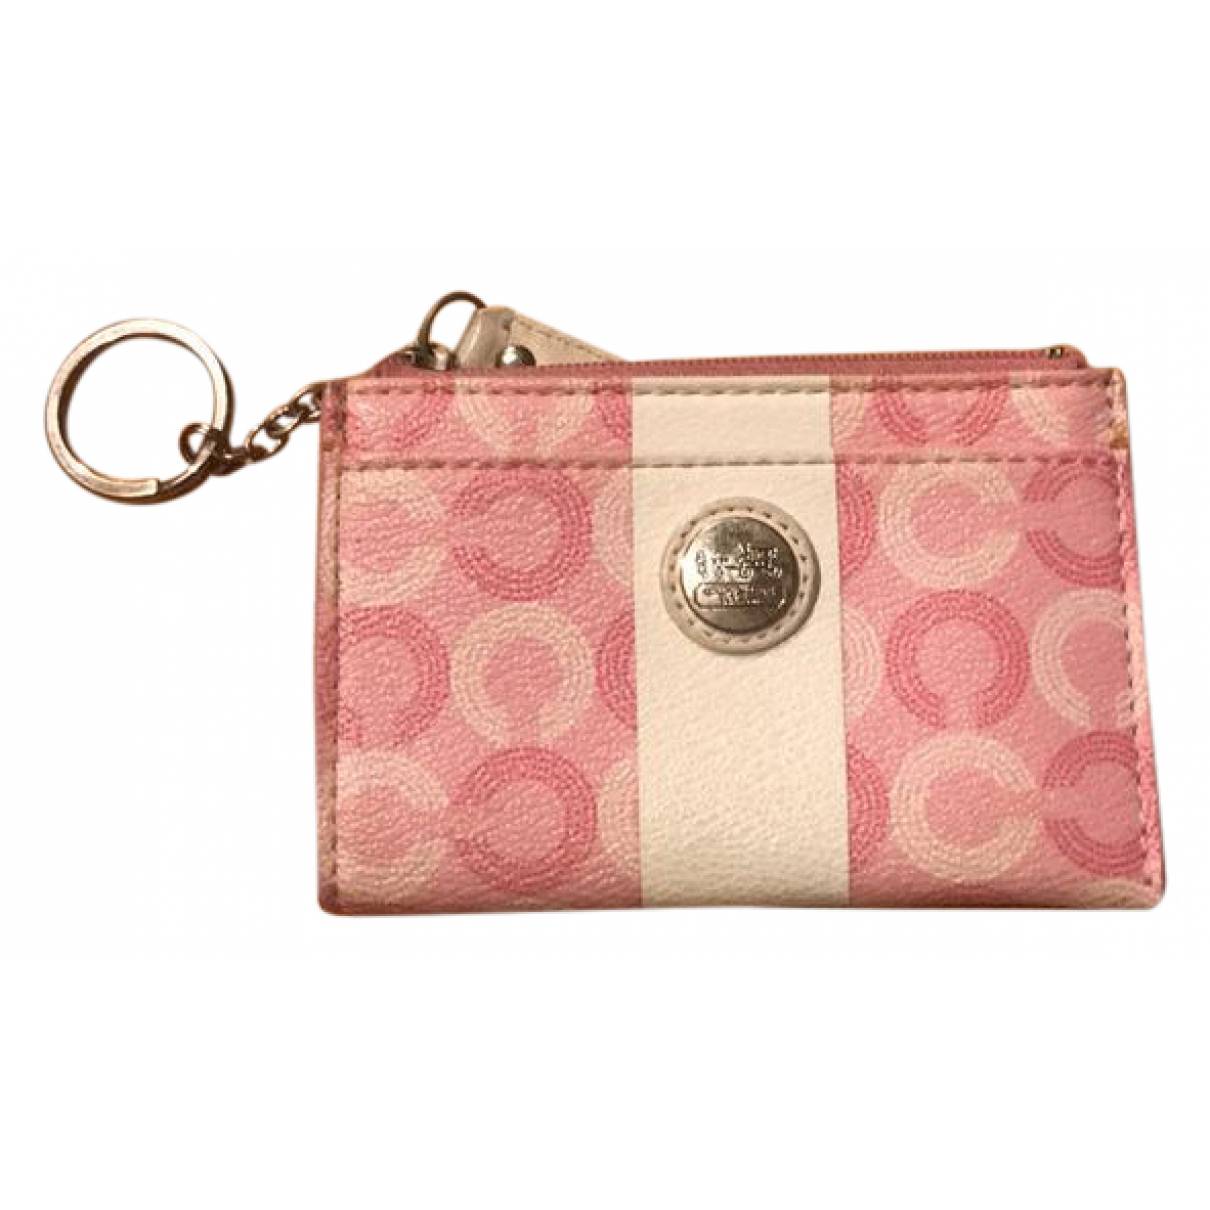 Wallet Coach Pink in Not specified - 27012571